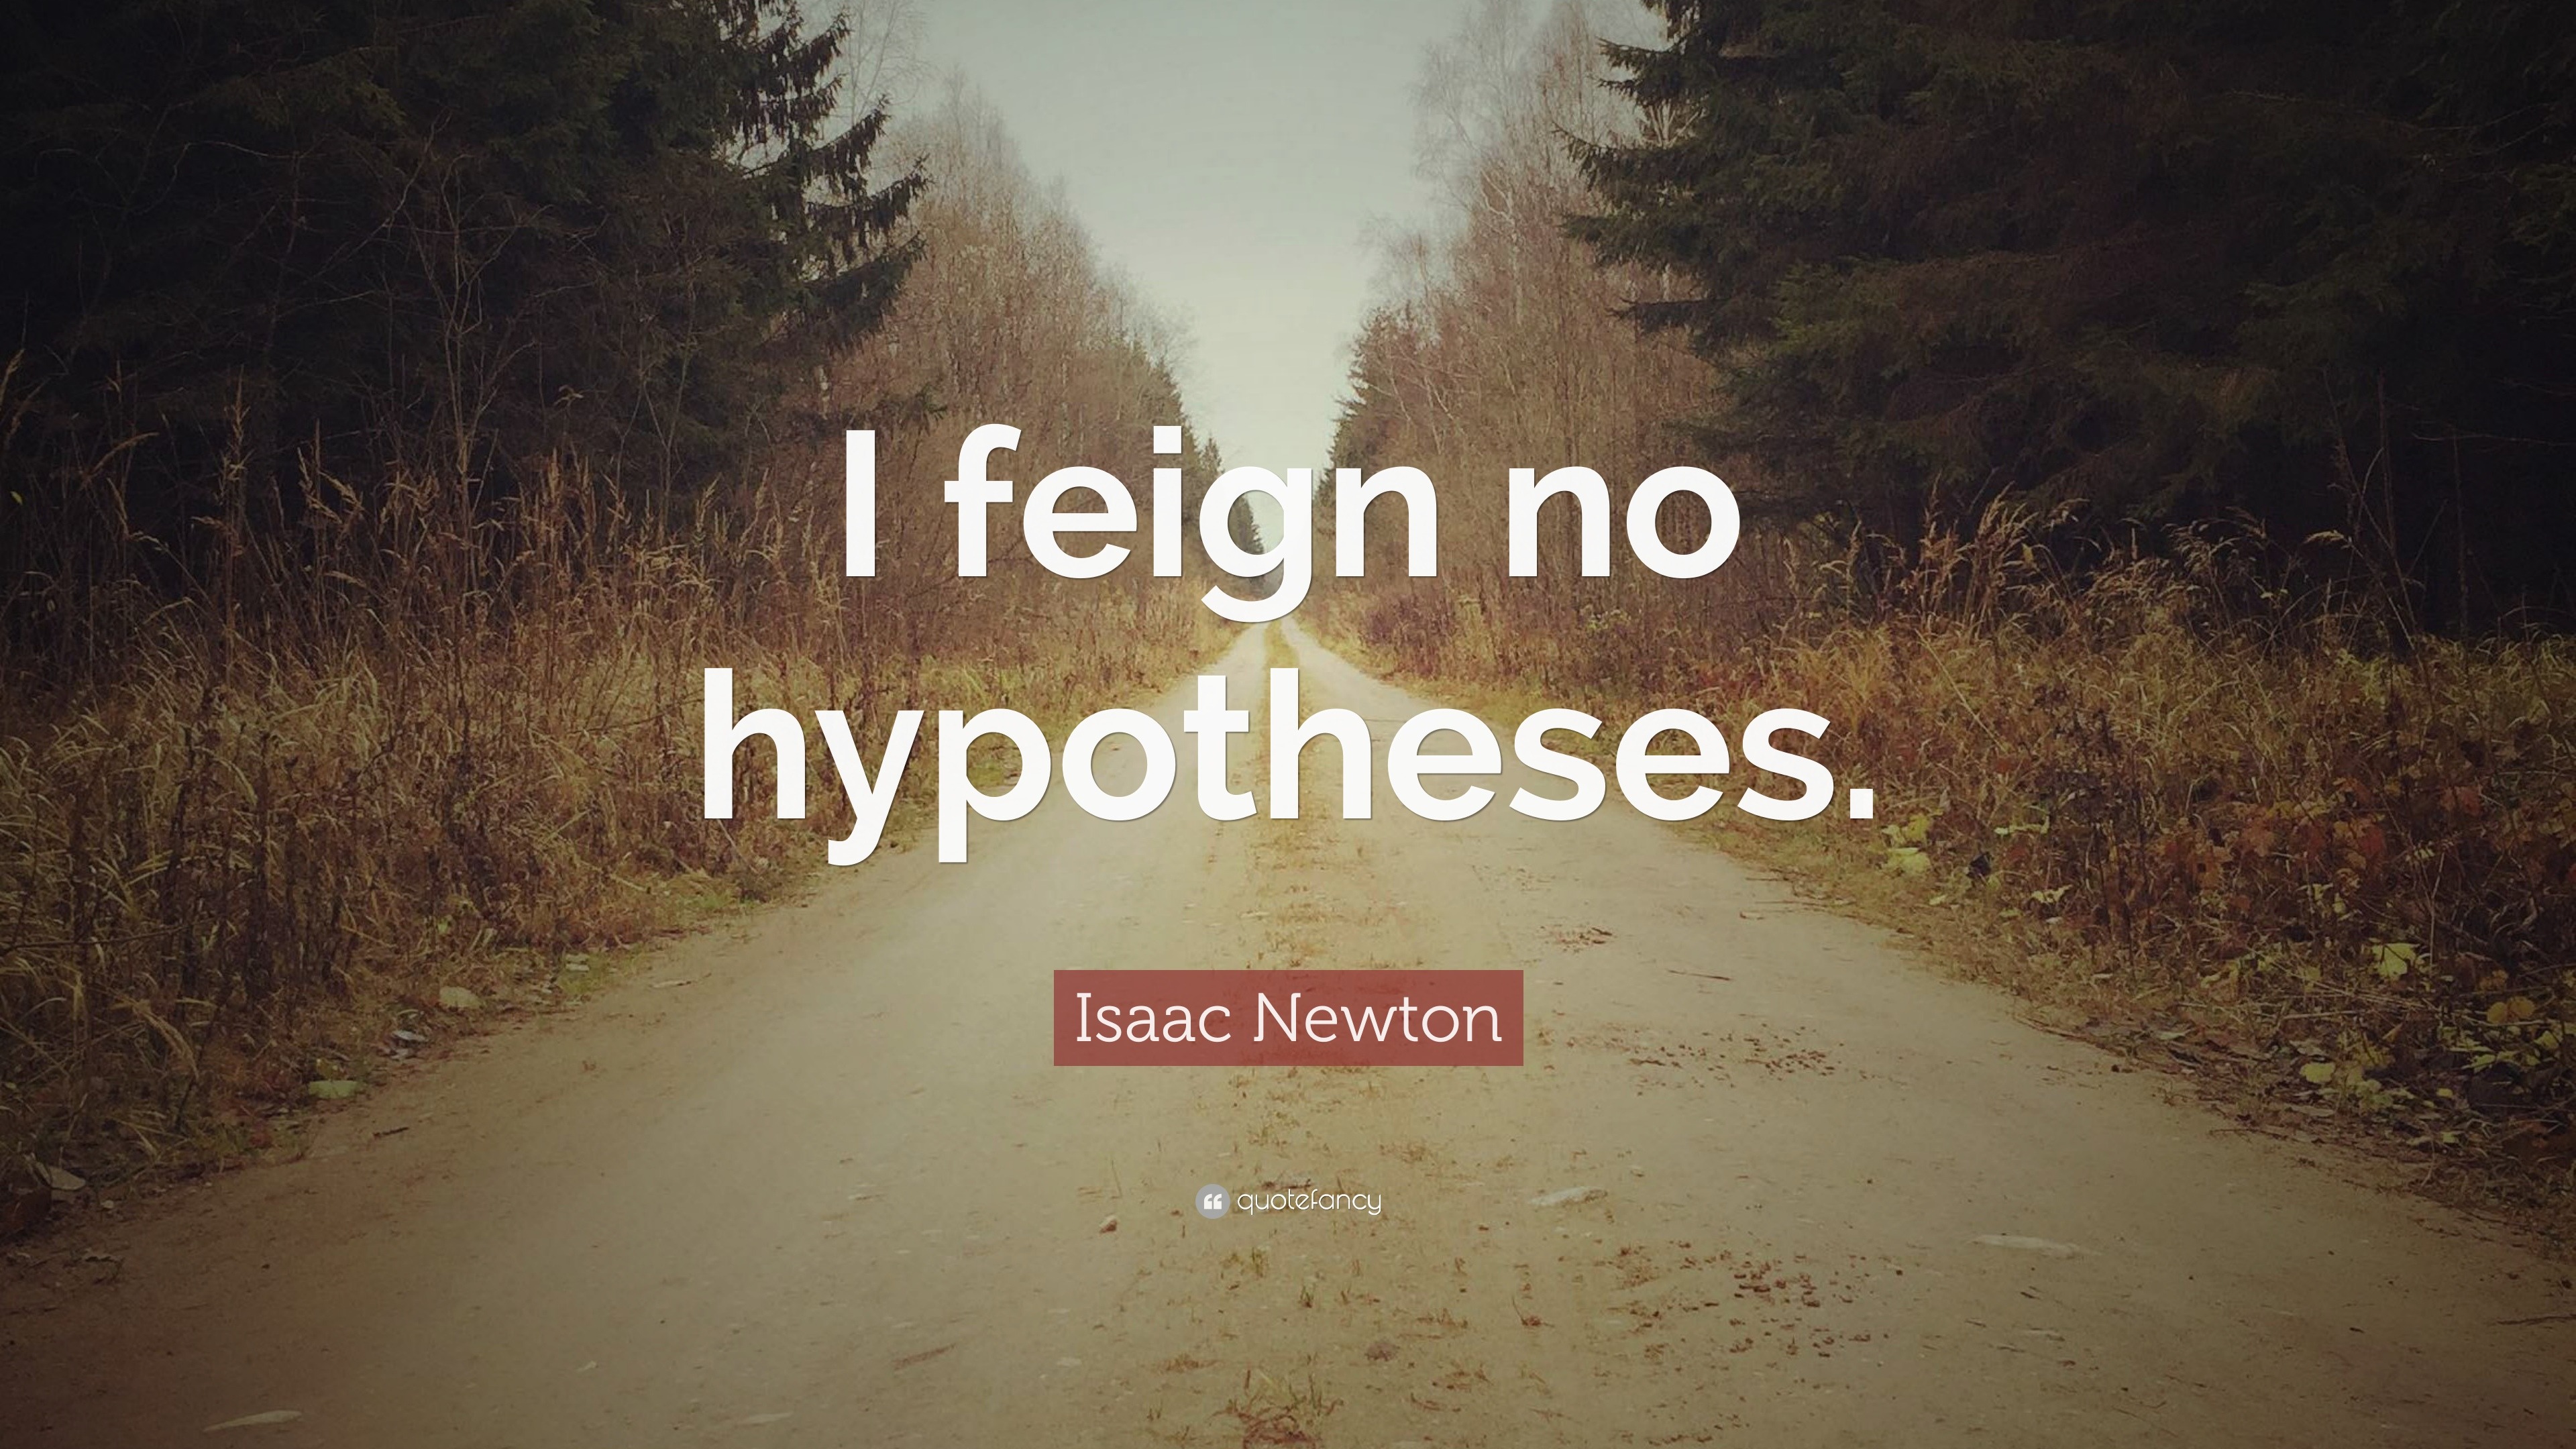 isaac newton quote